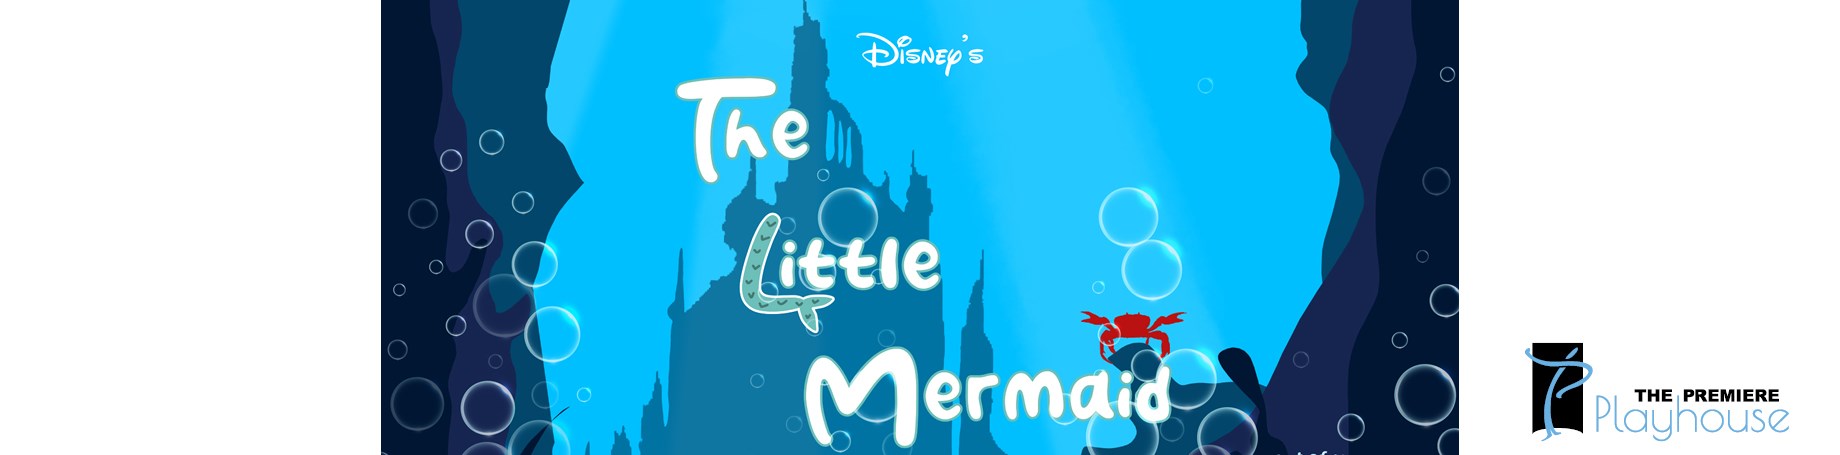 The Premiere Playhouse presents The Little Mermaid